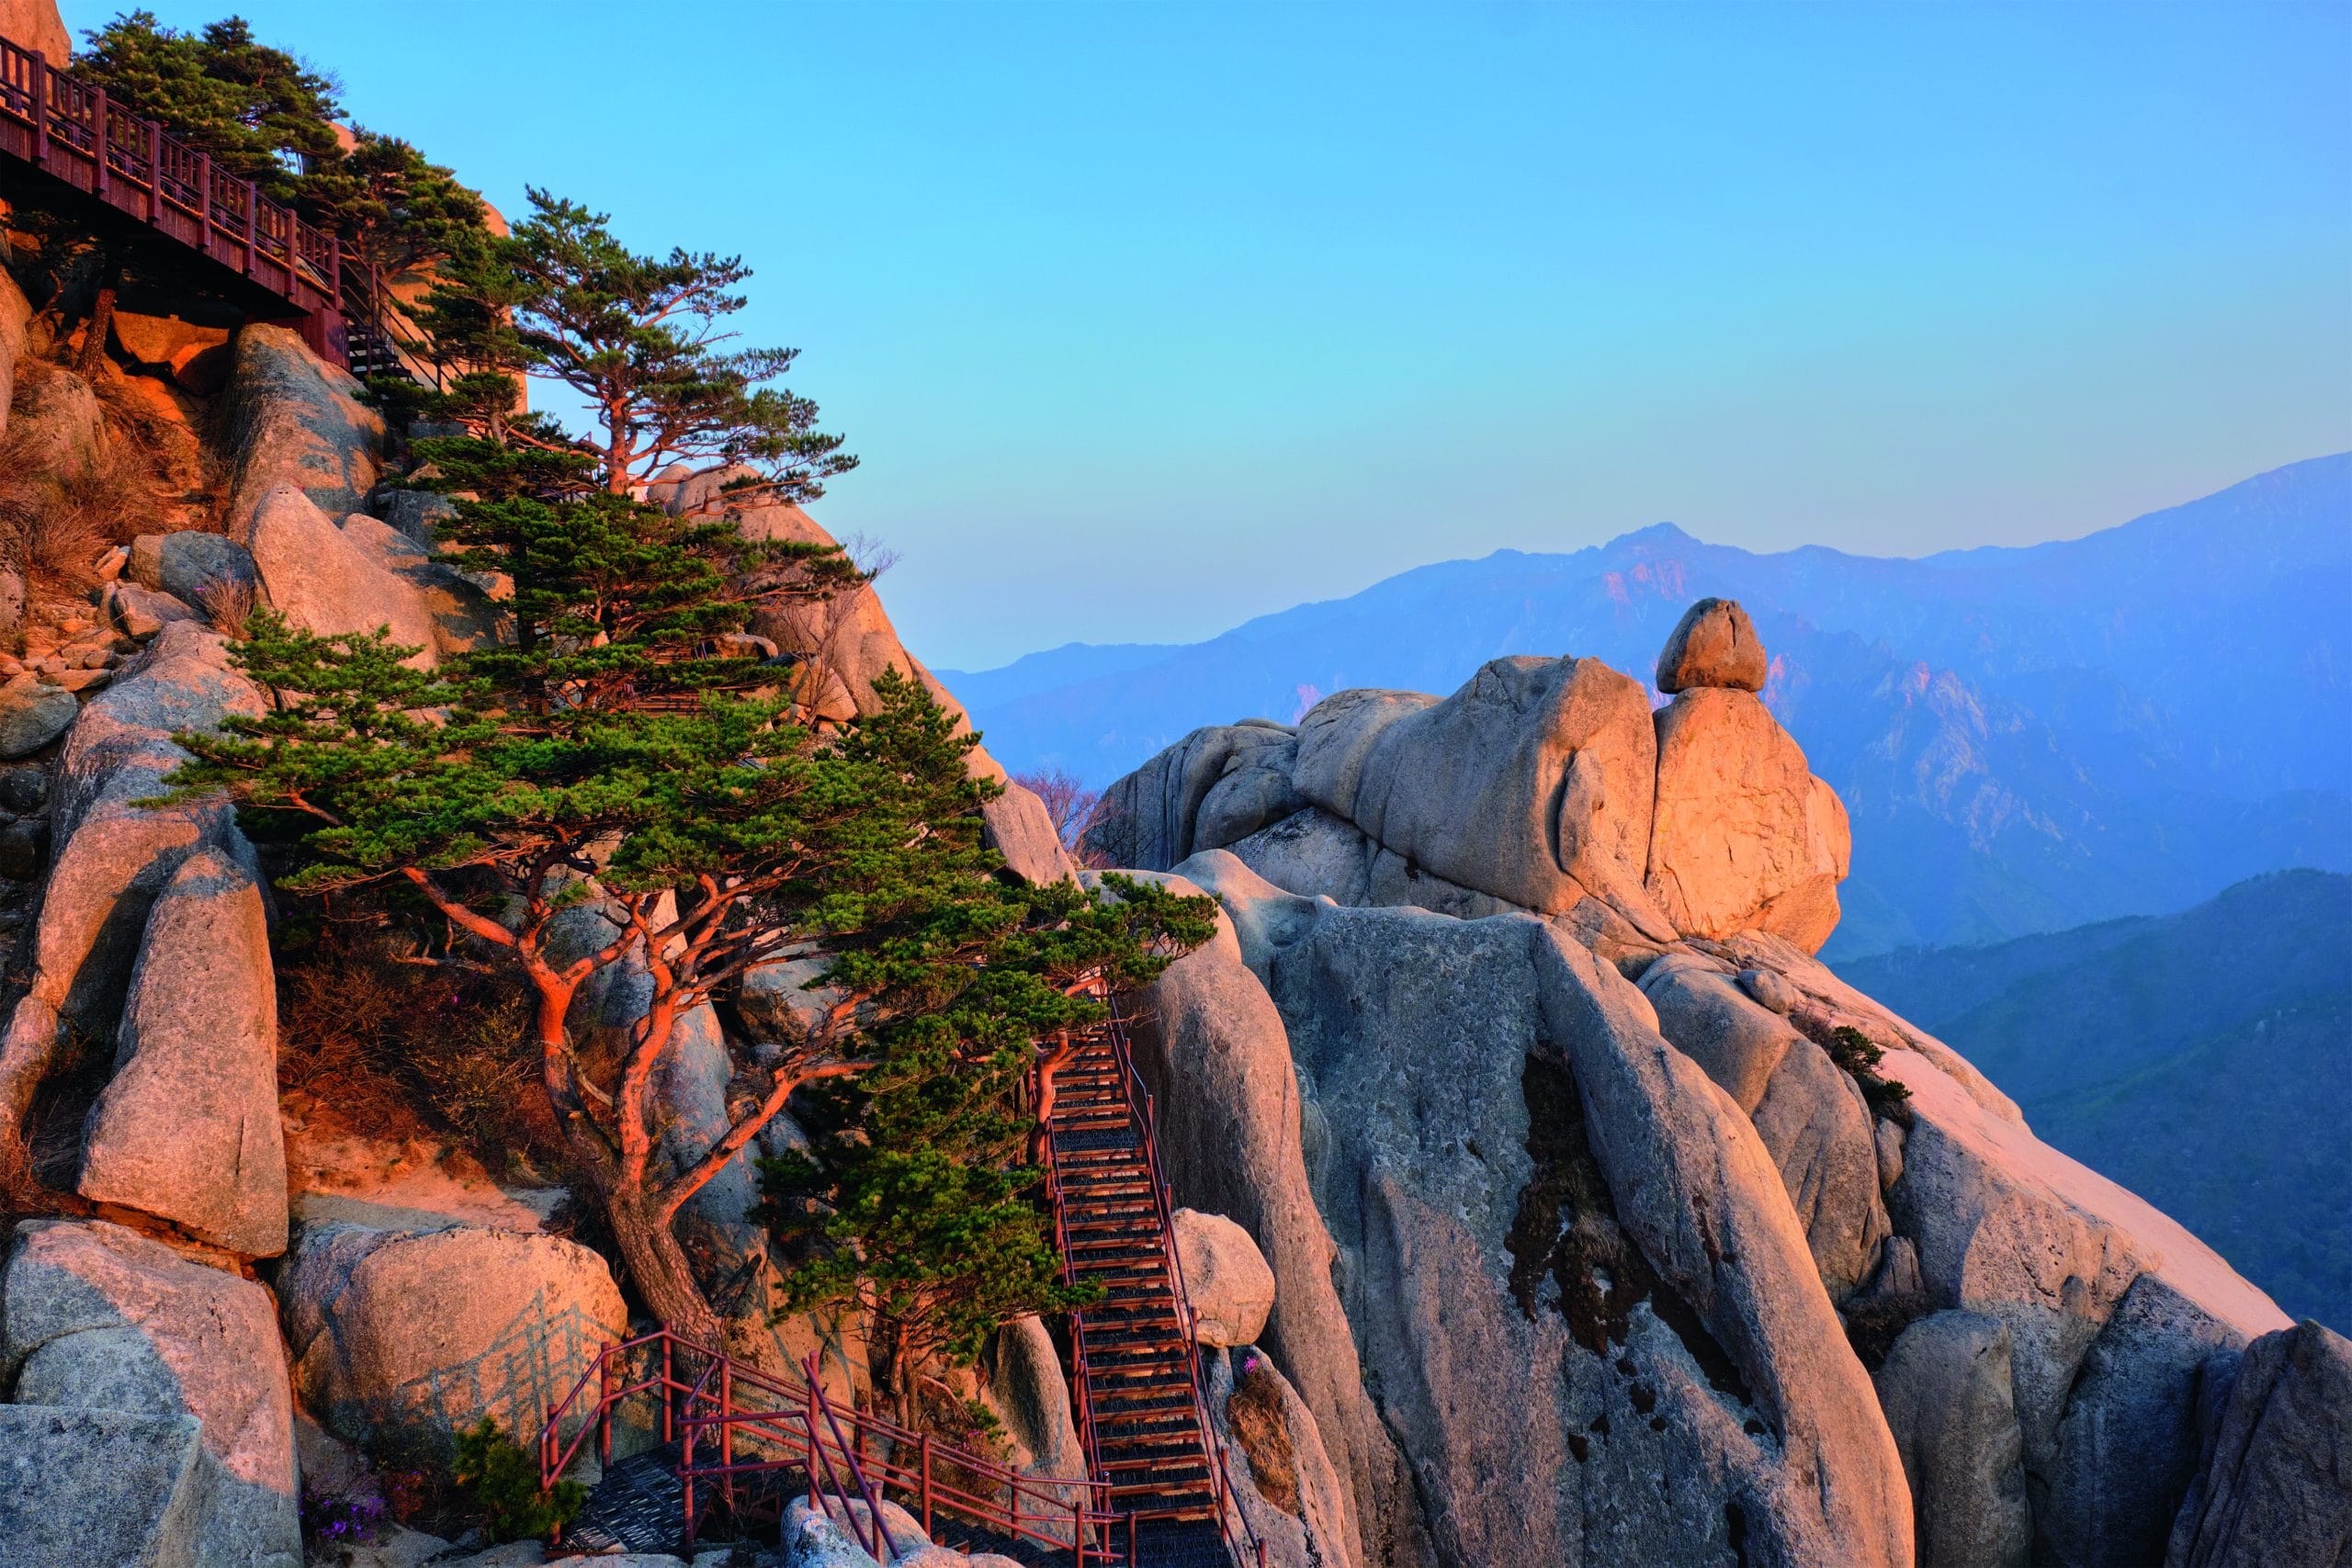 View of stones and rock formations from Ulsanbawi rock peak on sunset with staircase. Image: Getty